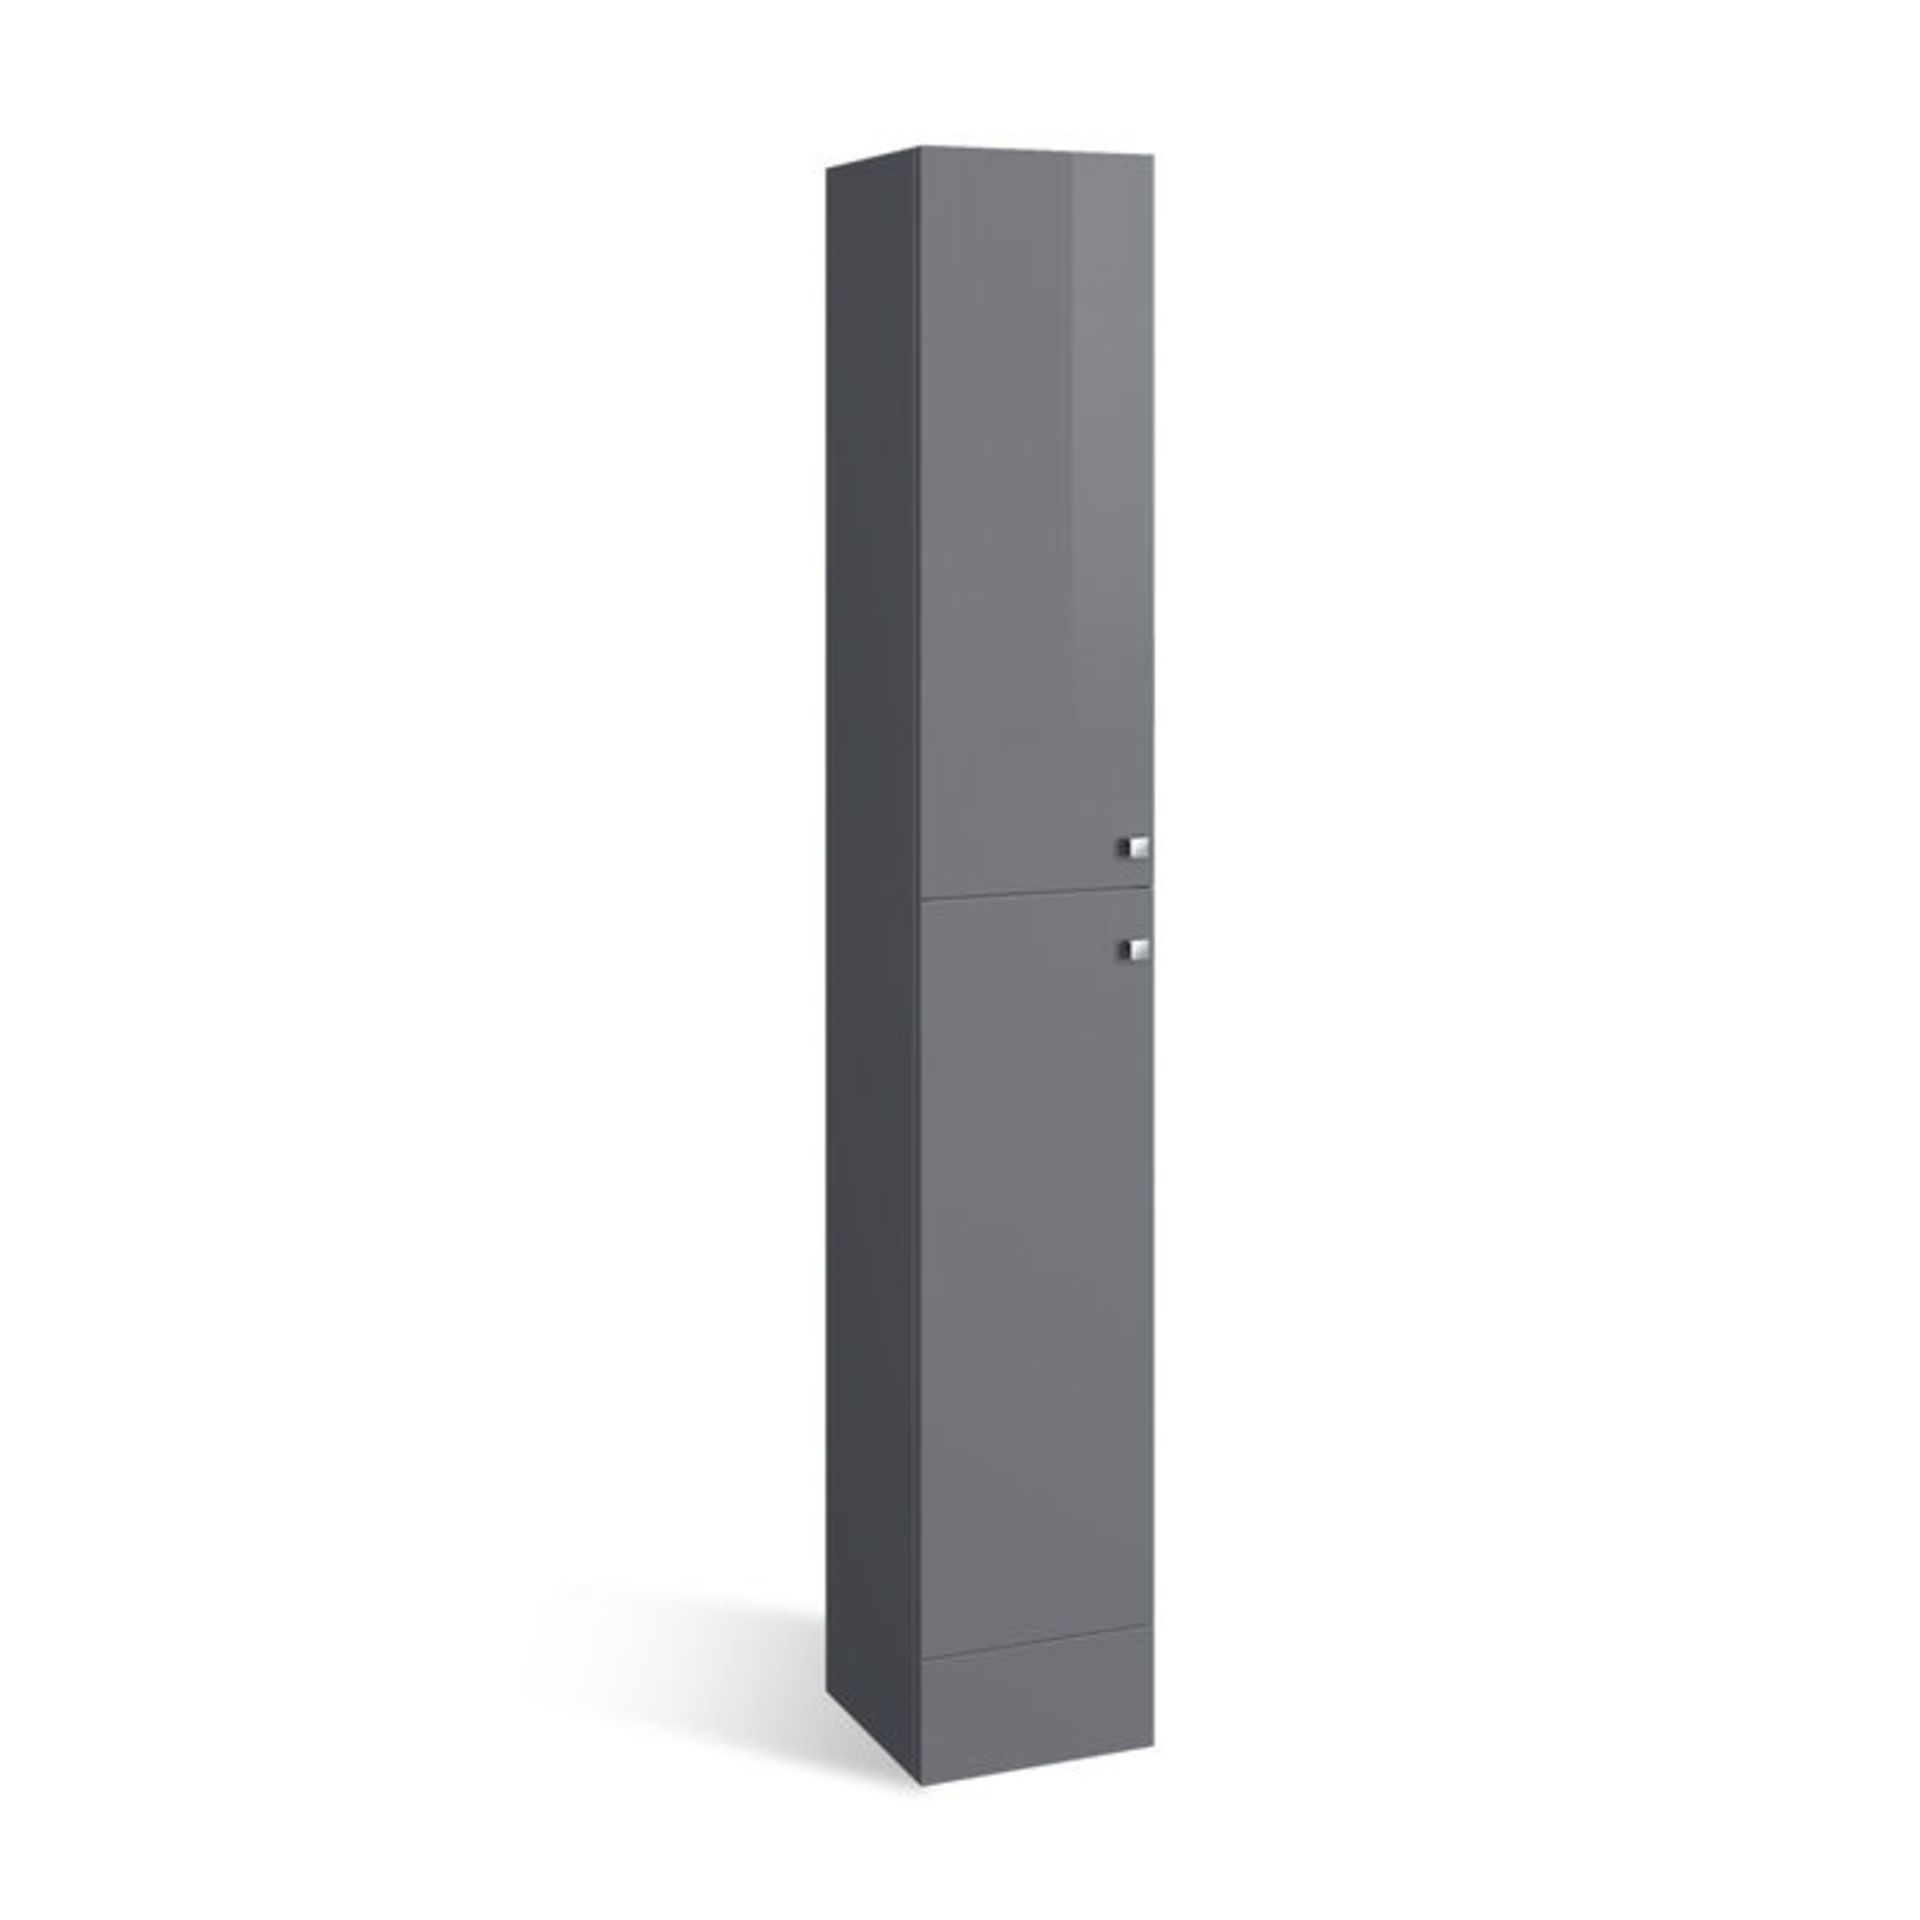 (NY77) 1900x300mm Harper Gloss Grey Tall Storage Cabinet - Floor Standing. RRP £199.99. Our tall - Image 4 of 5